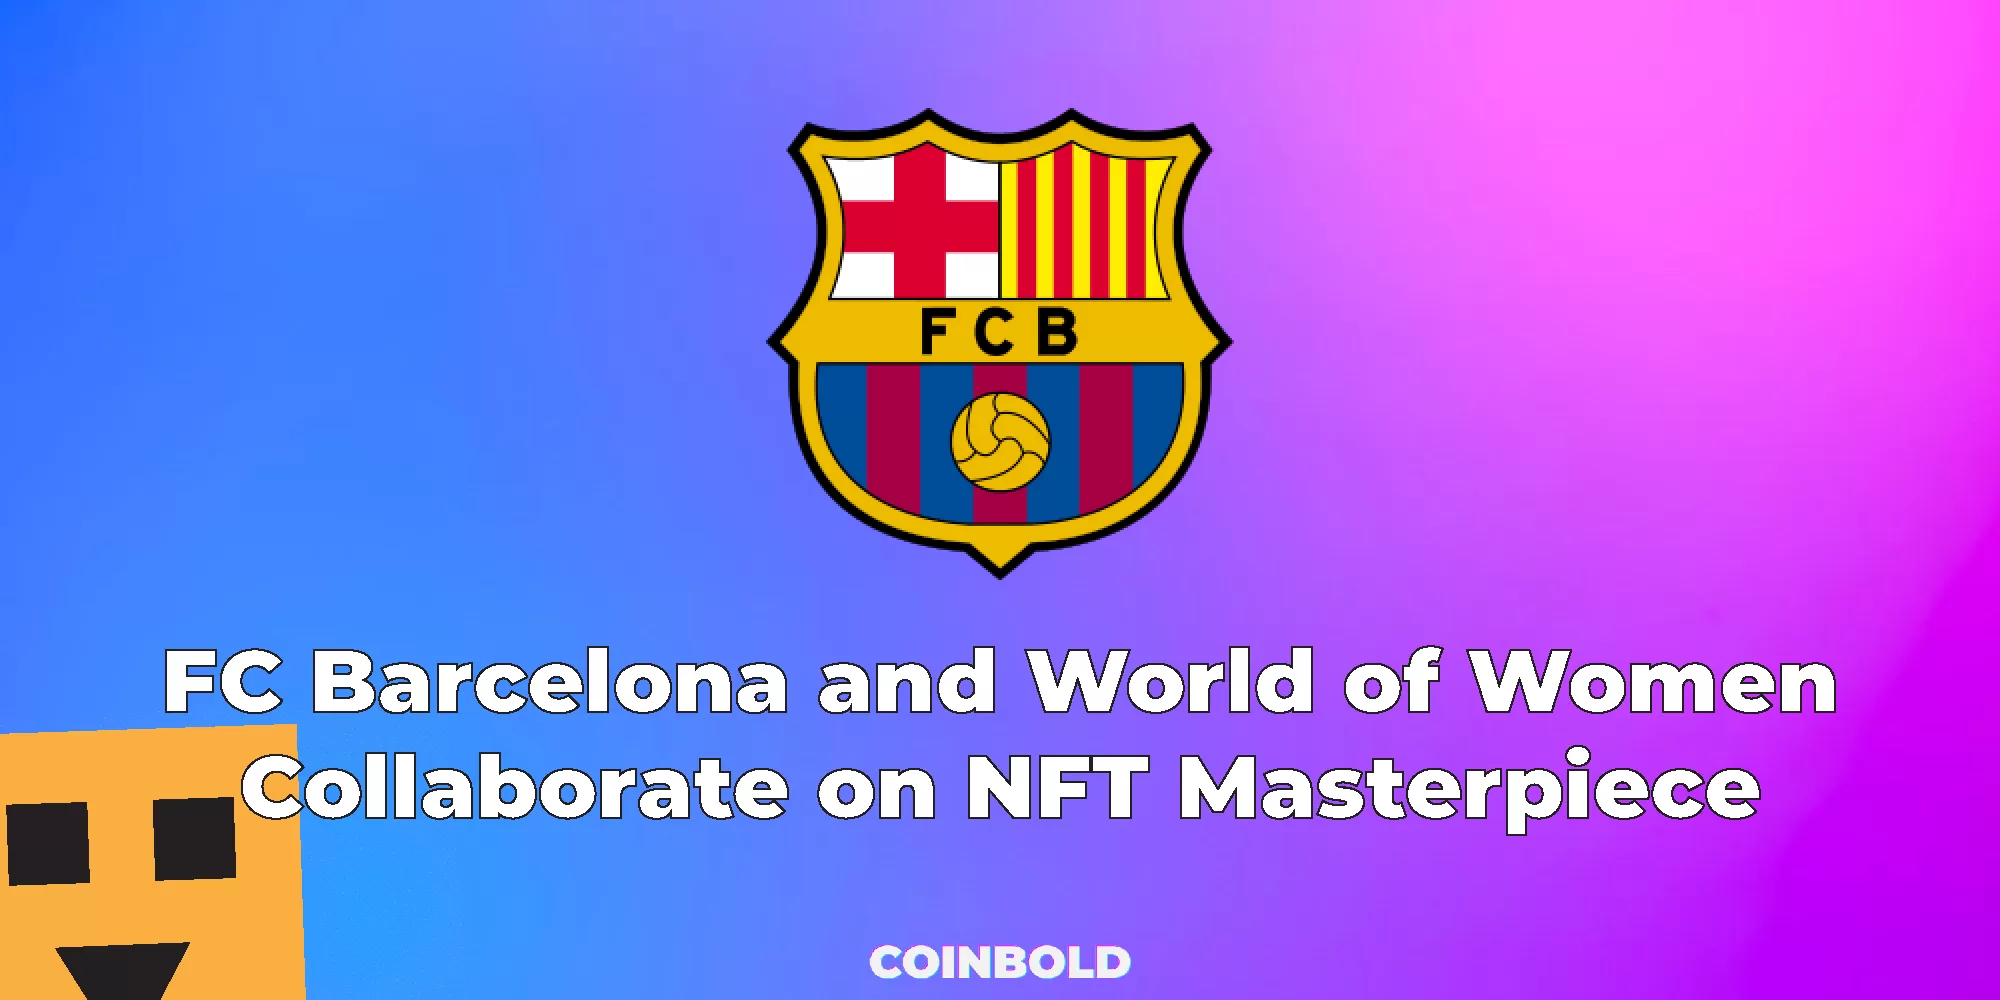 FC Barcelona and World of Women Collaborate on NFT Masterpiece